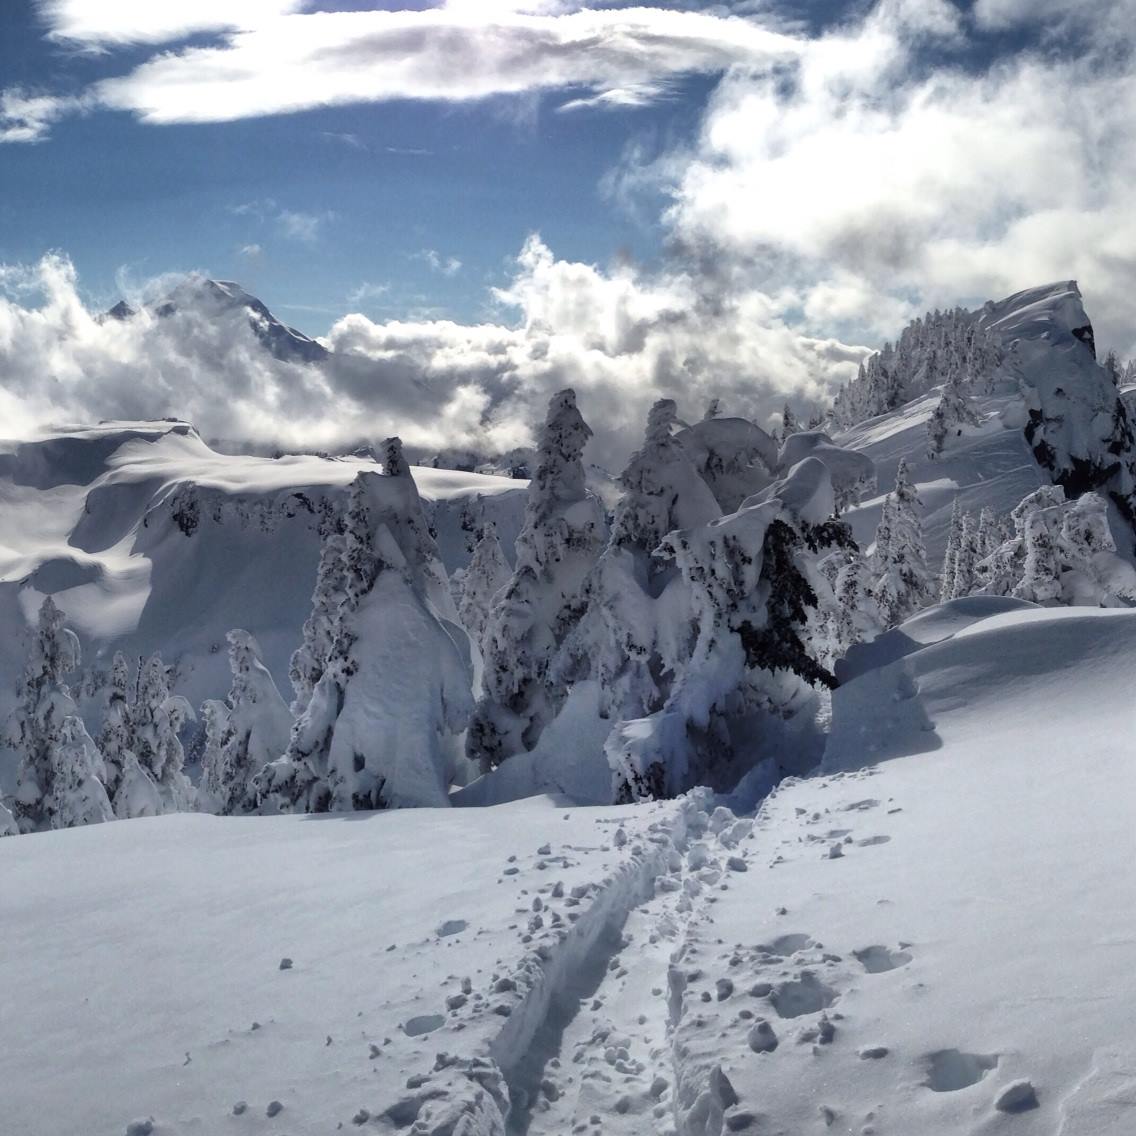 How to Get Started Backcountry Skiing & Snowboarding